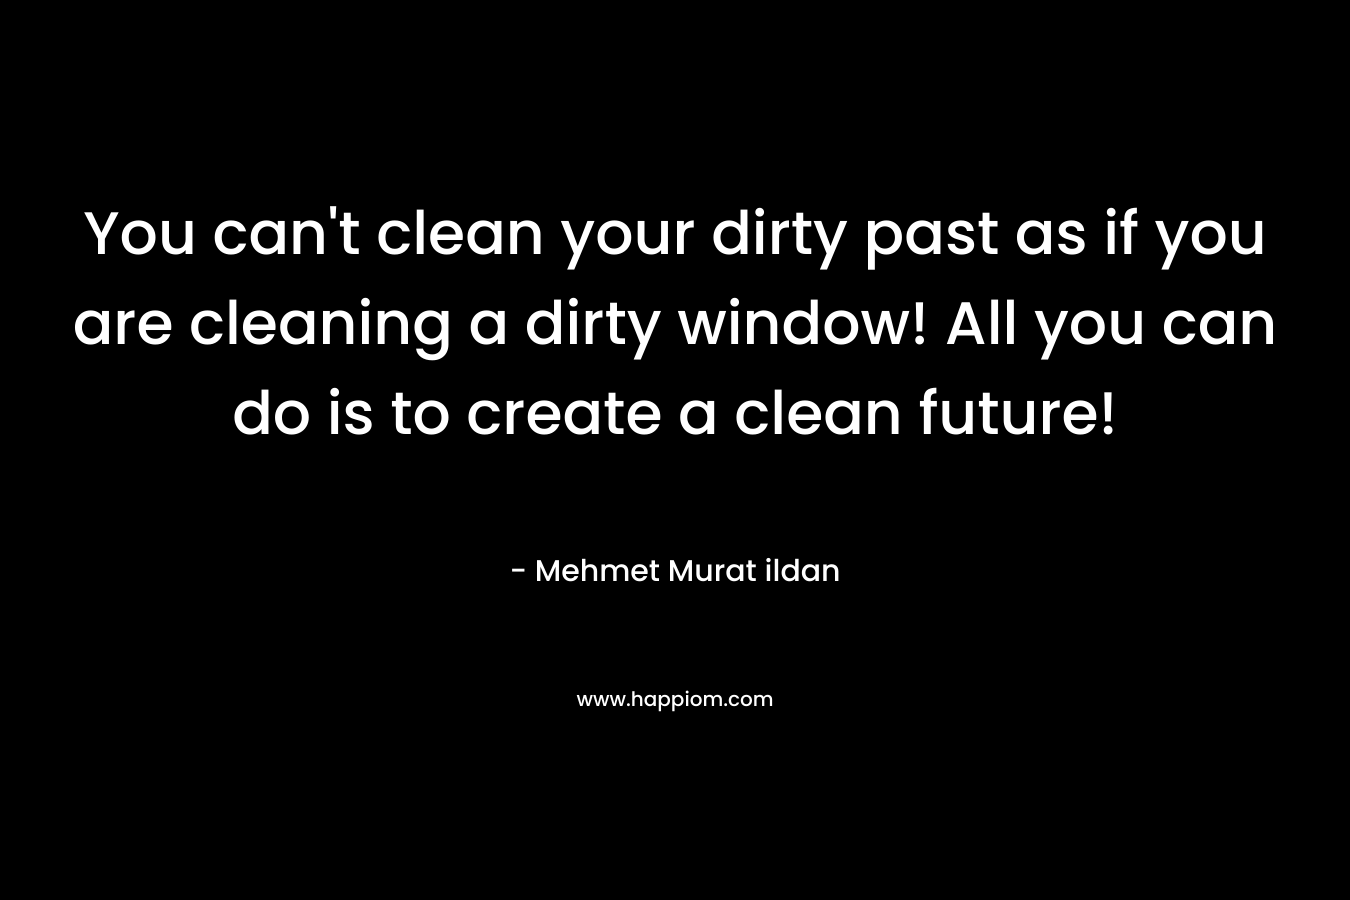 You can't clean your dirty past as if you are cleaning a dirty window! All you can do is to create a clean future!